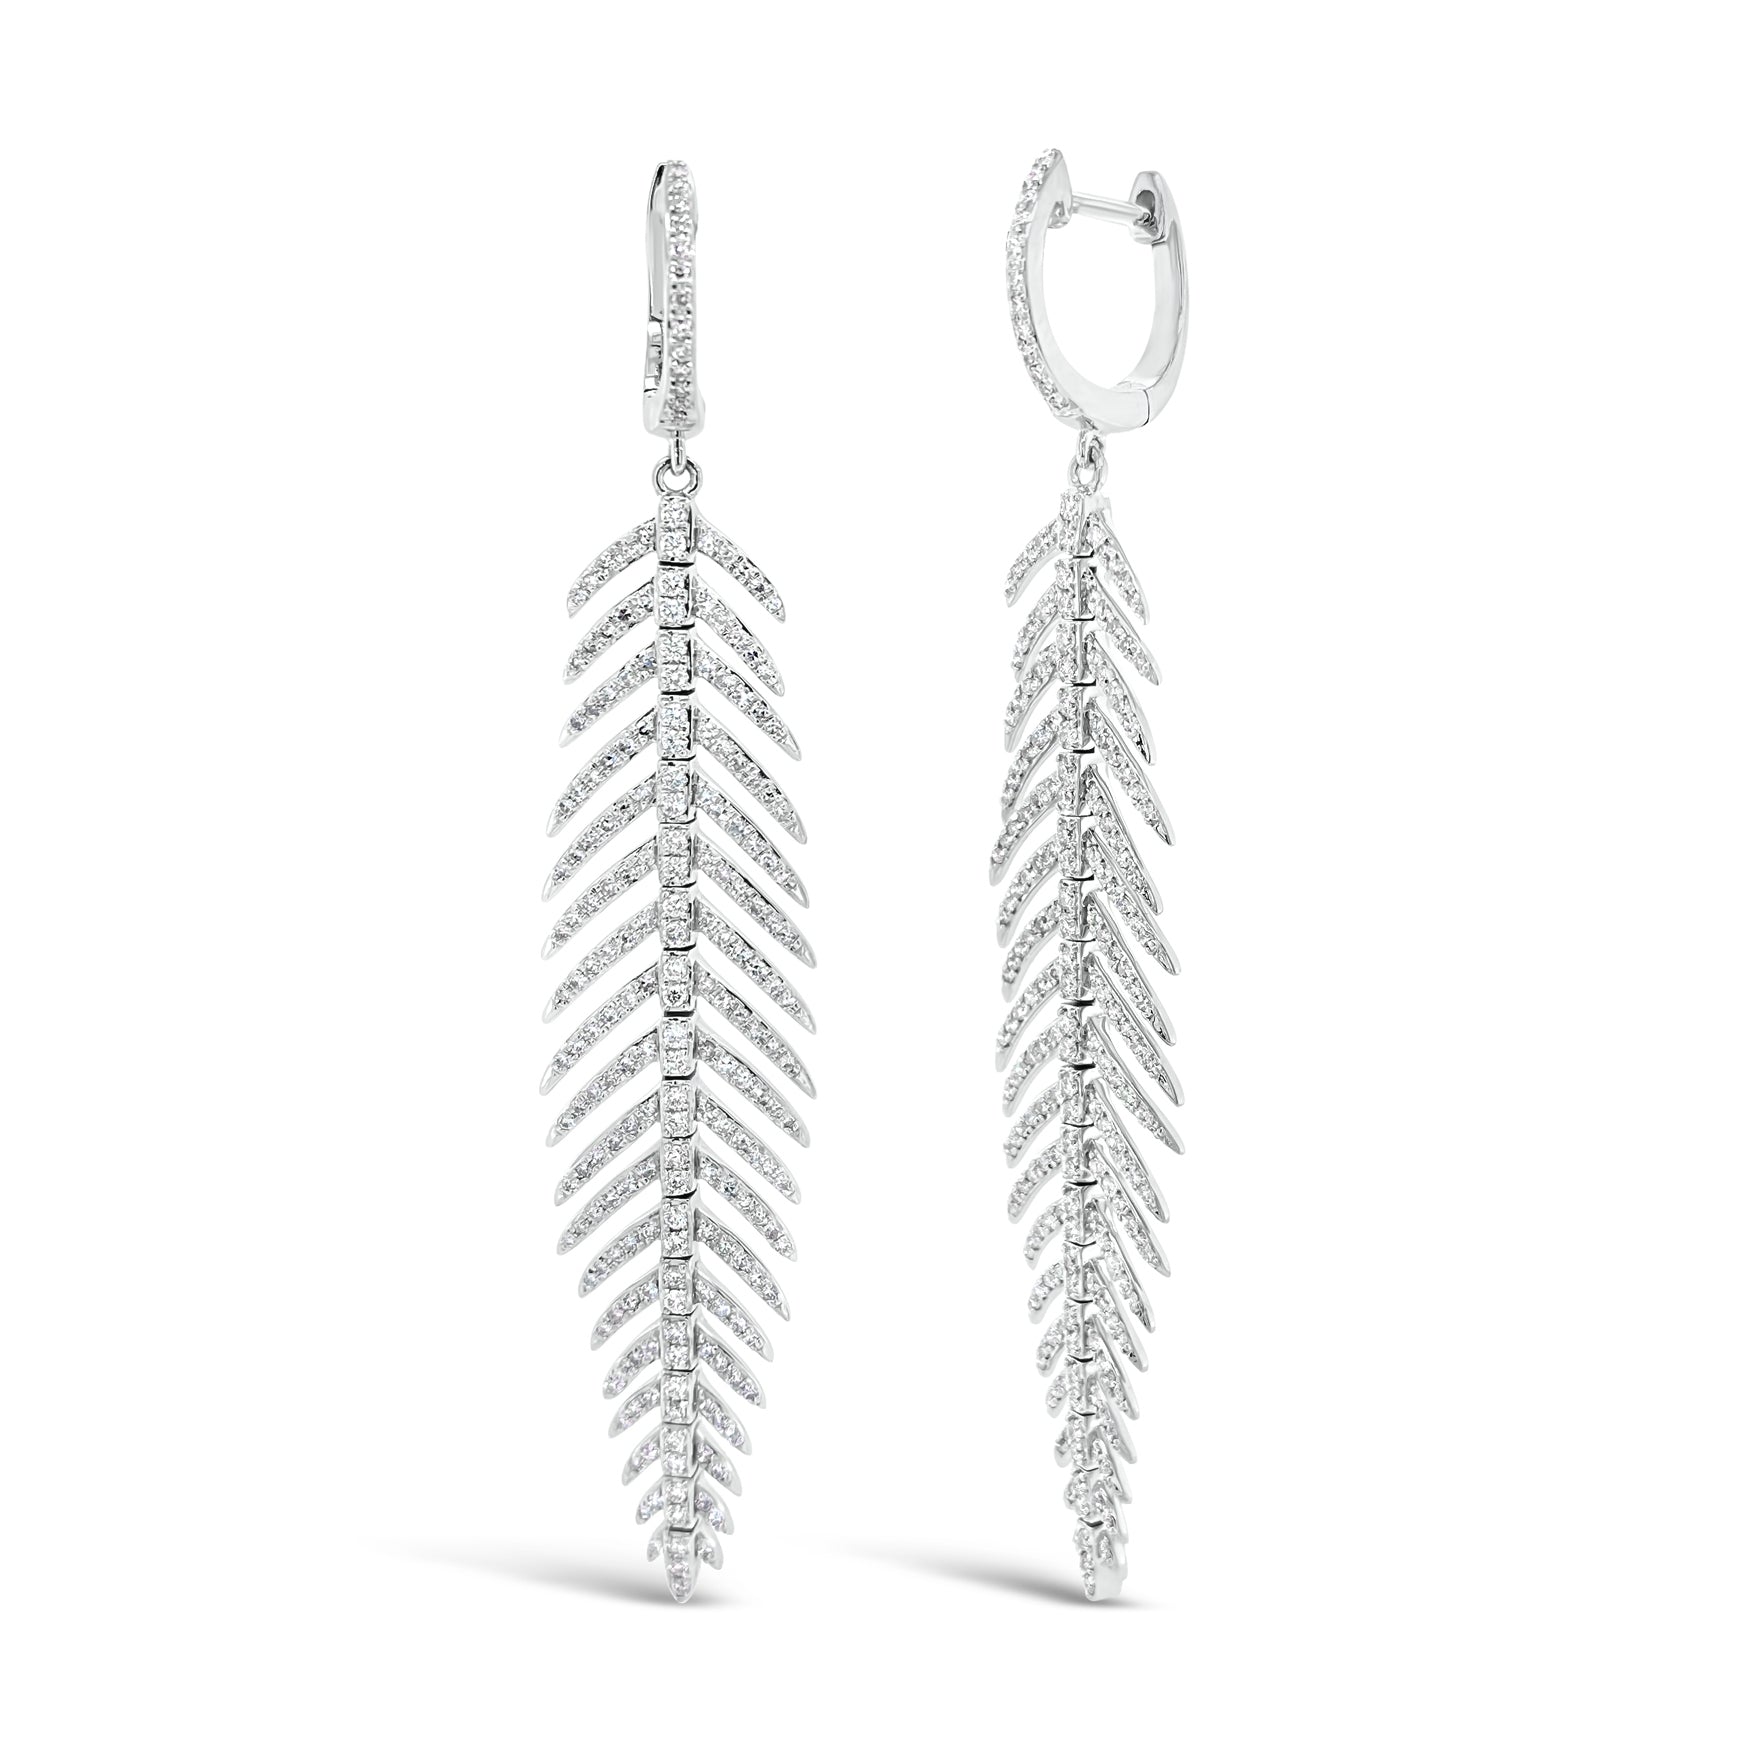 Diamond Feather Dangle Earrings  - 14K gold weighing 10.73 grams  - 436 round diamonds totaling 1.29 carats